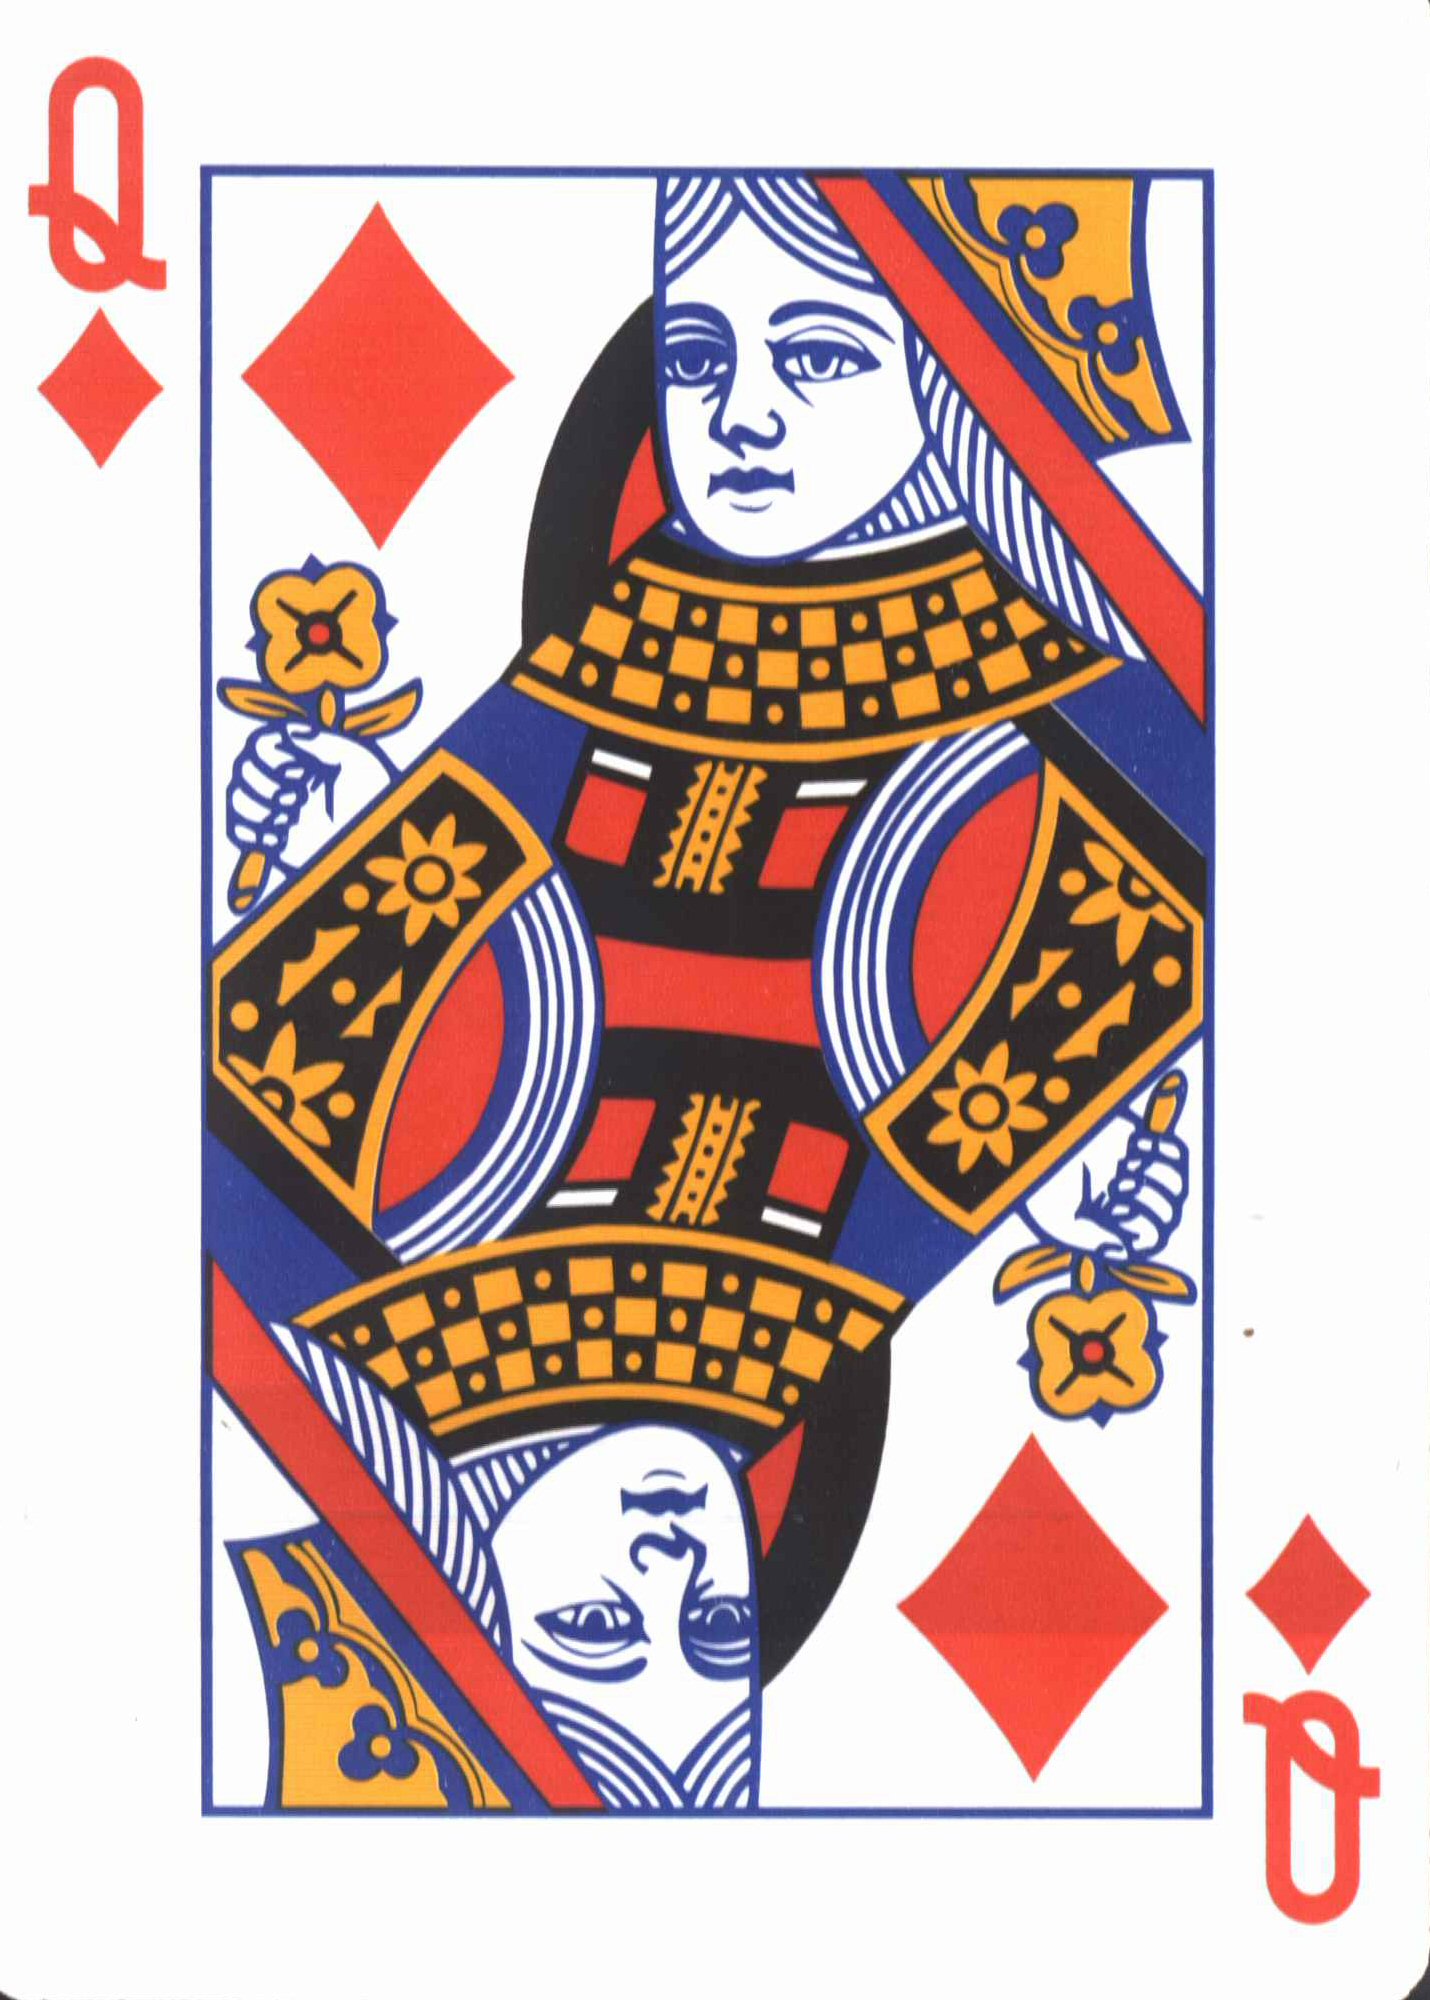 Playing Cards (Object) - Giant Bomb